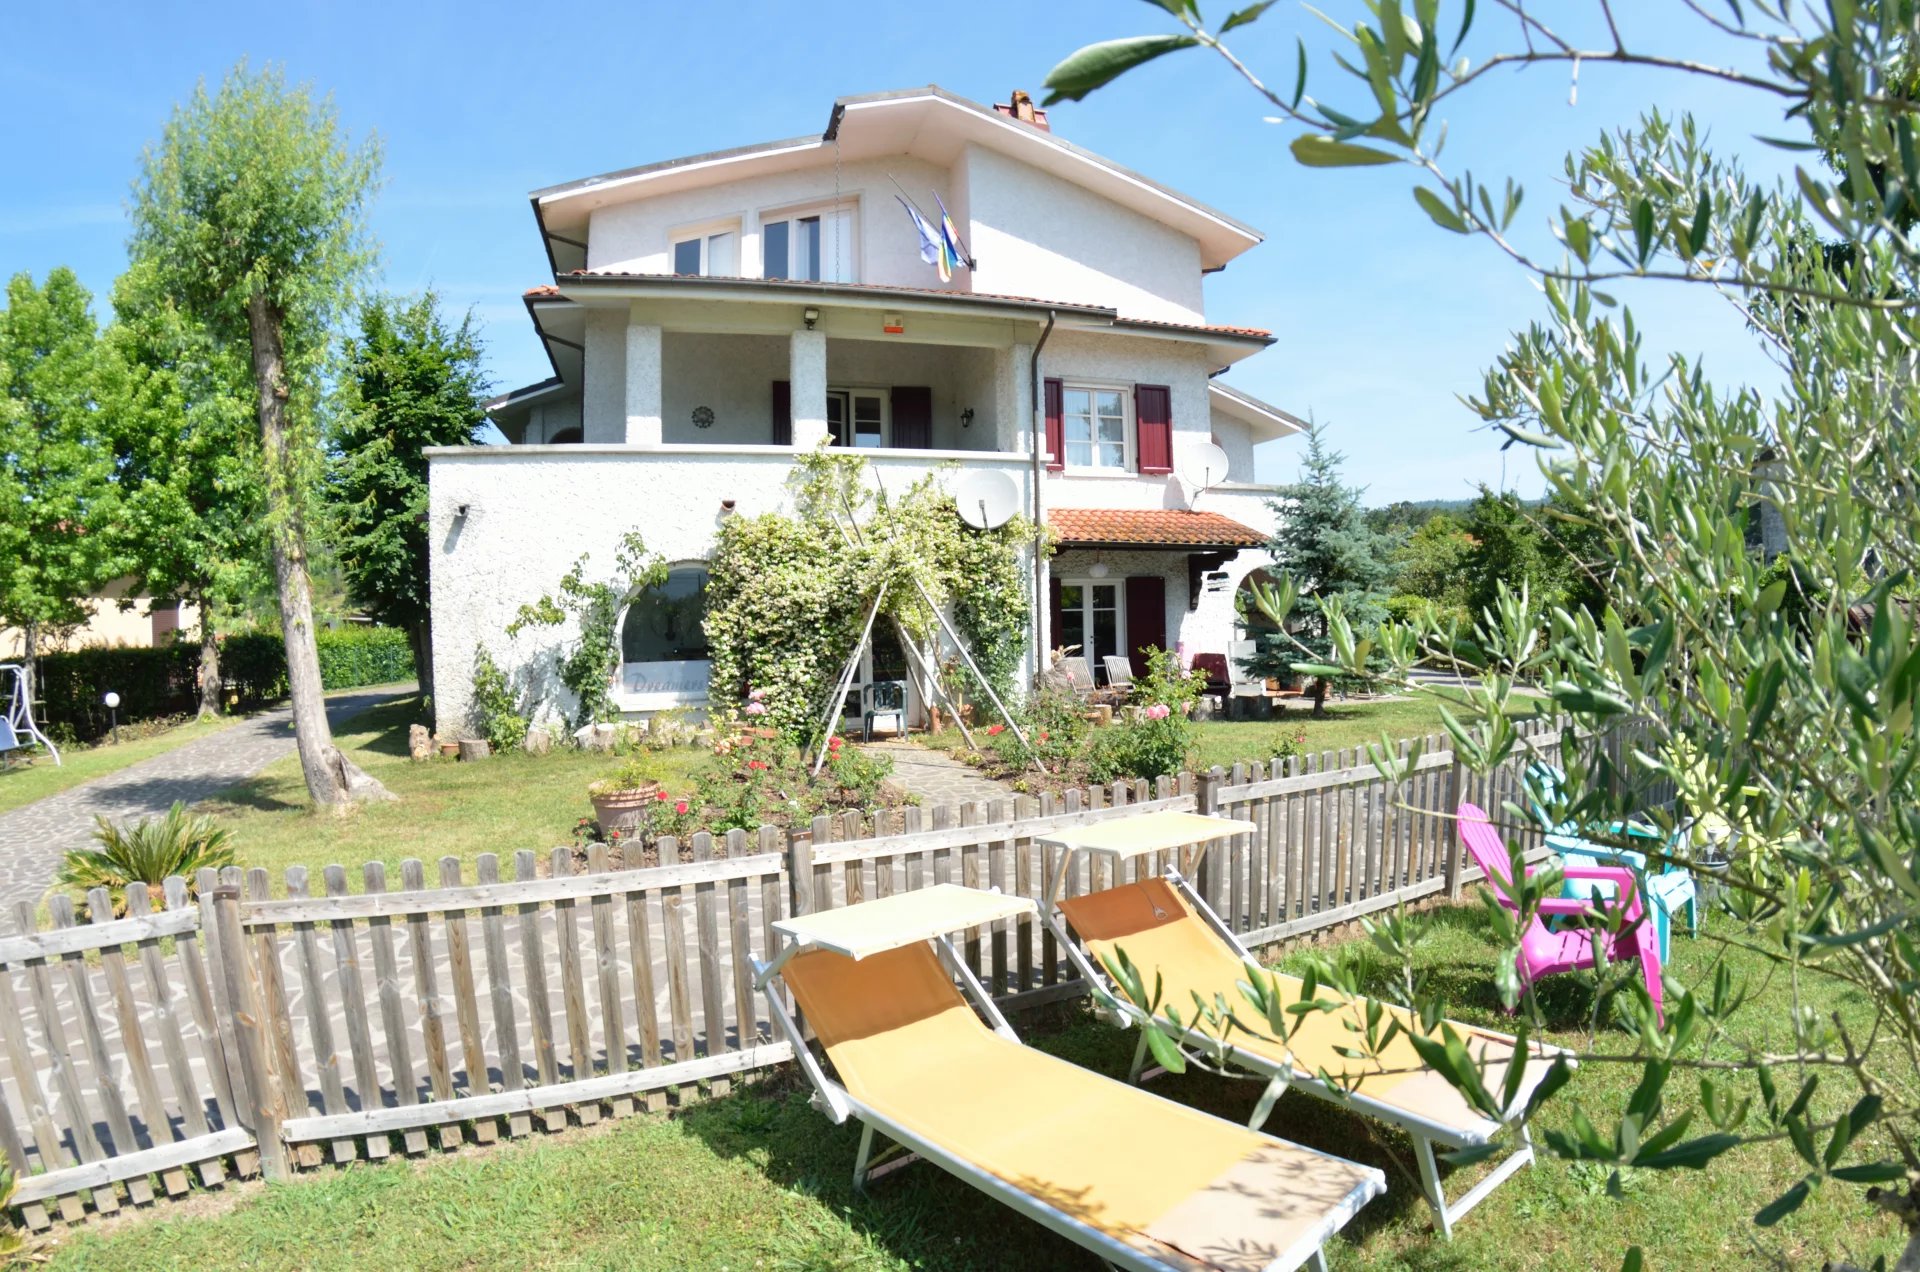 ITALY, TUSCANY, LUCCA, VILLA WITH POOL, 12 PERSONS